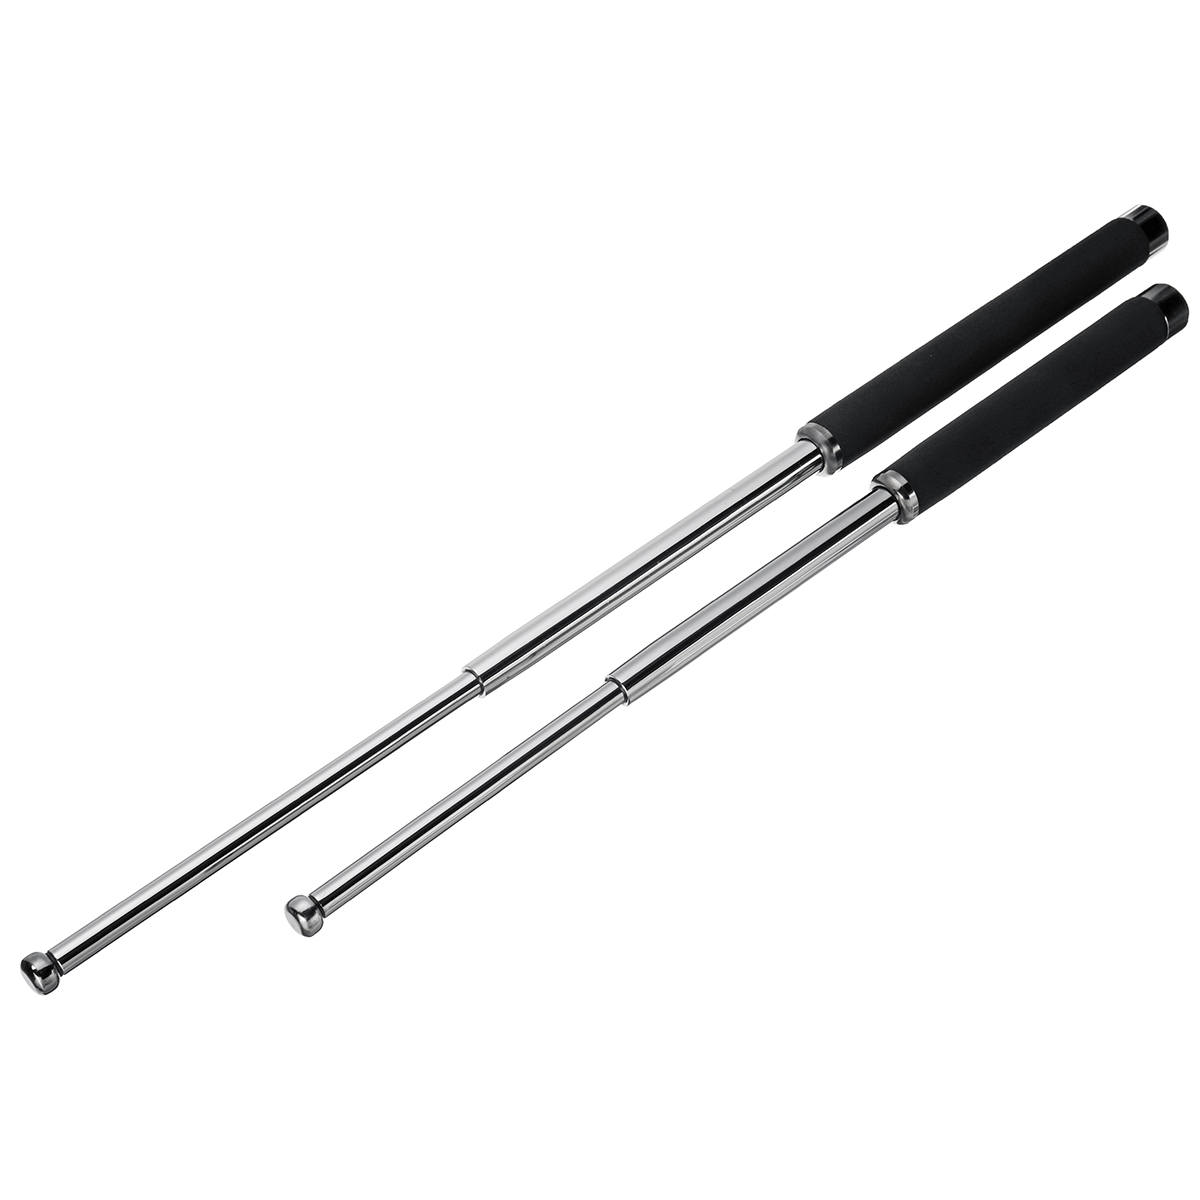 Tactical-Pen-Guard-Protection-Telescopic-Emergency-Survival-Tool-Gift-Window-Breaking-1288354